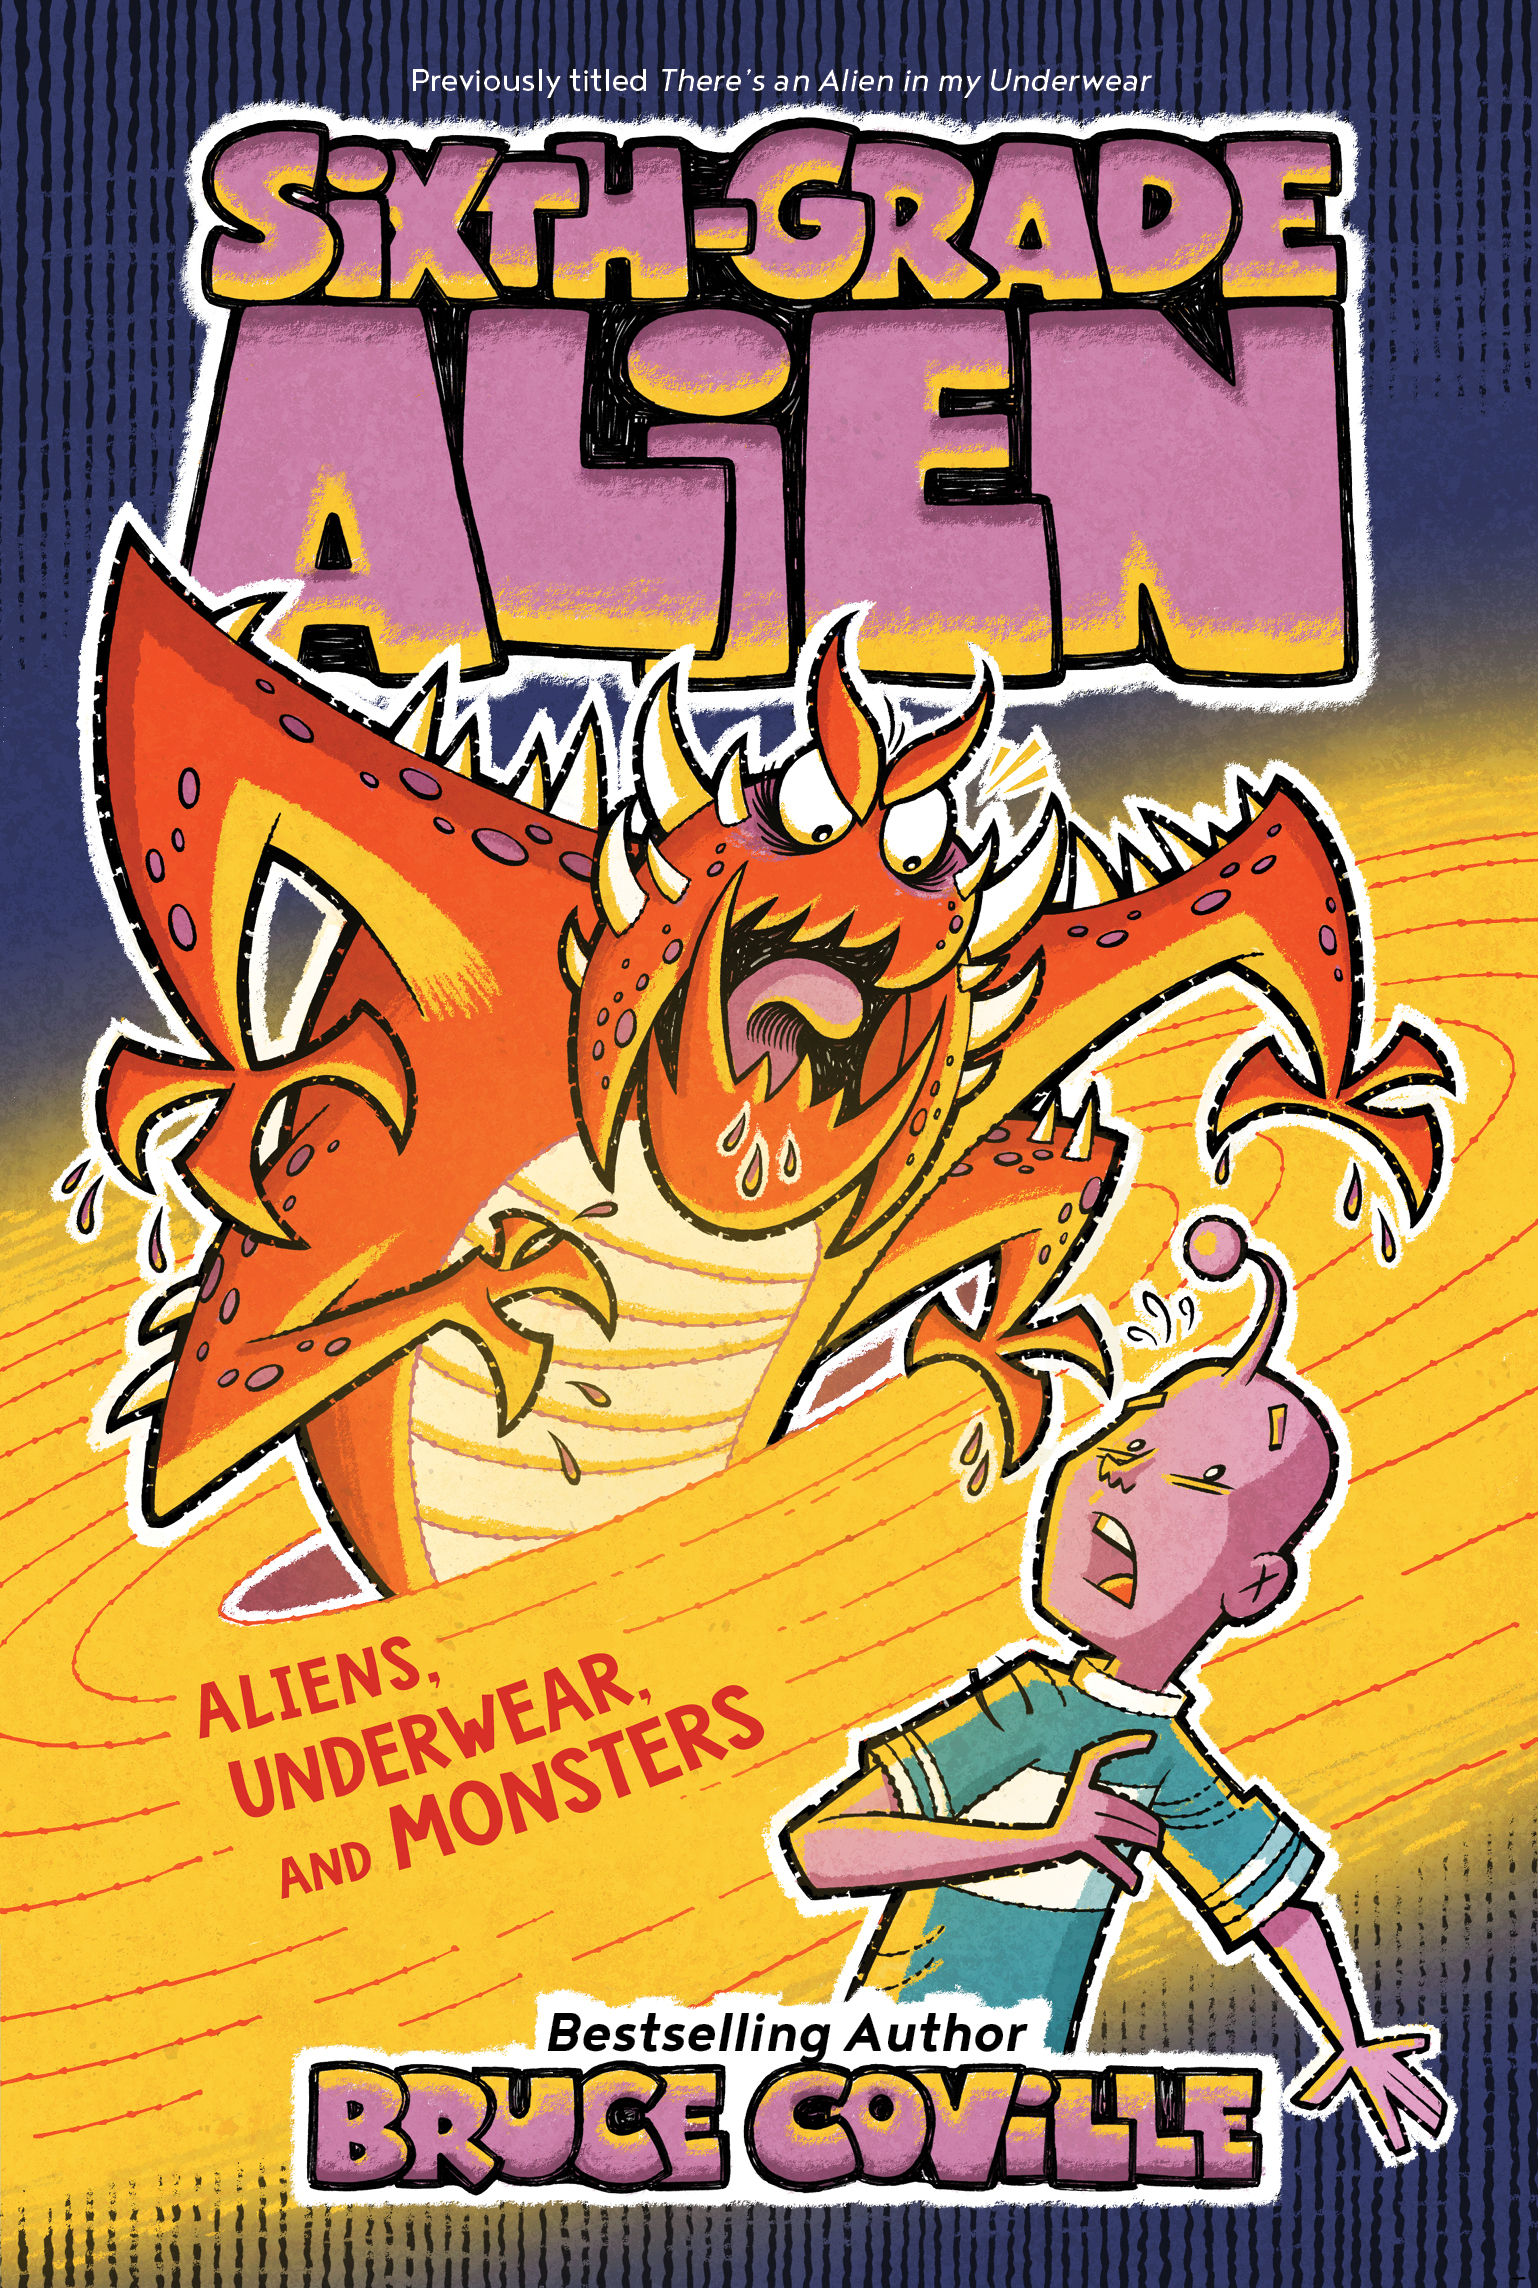 11 Aliens, Underwear, and Monsters – brucecoville.com